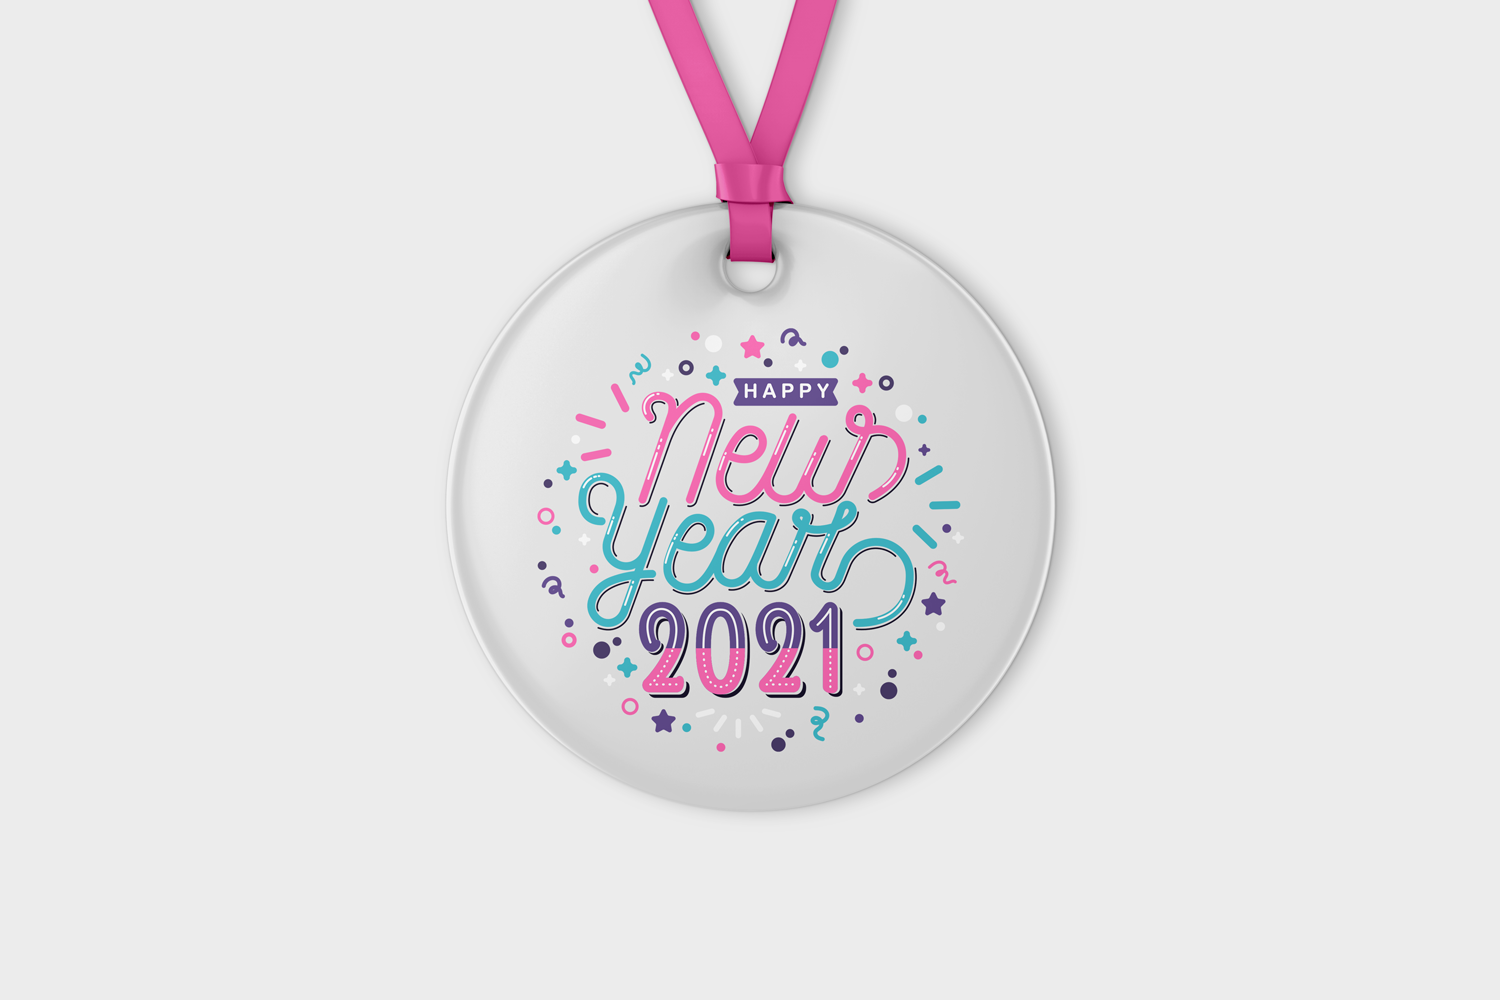 Acrylic disc mockup with Happy New Year 2021 text